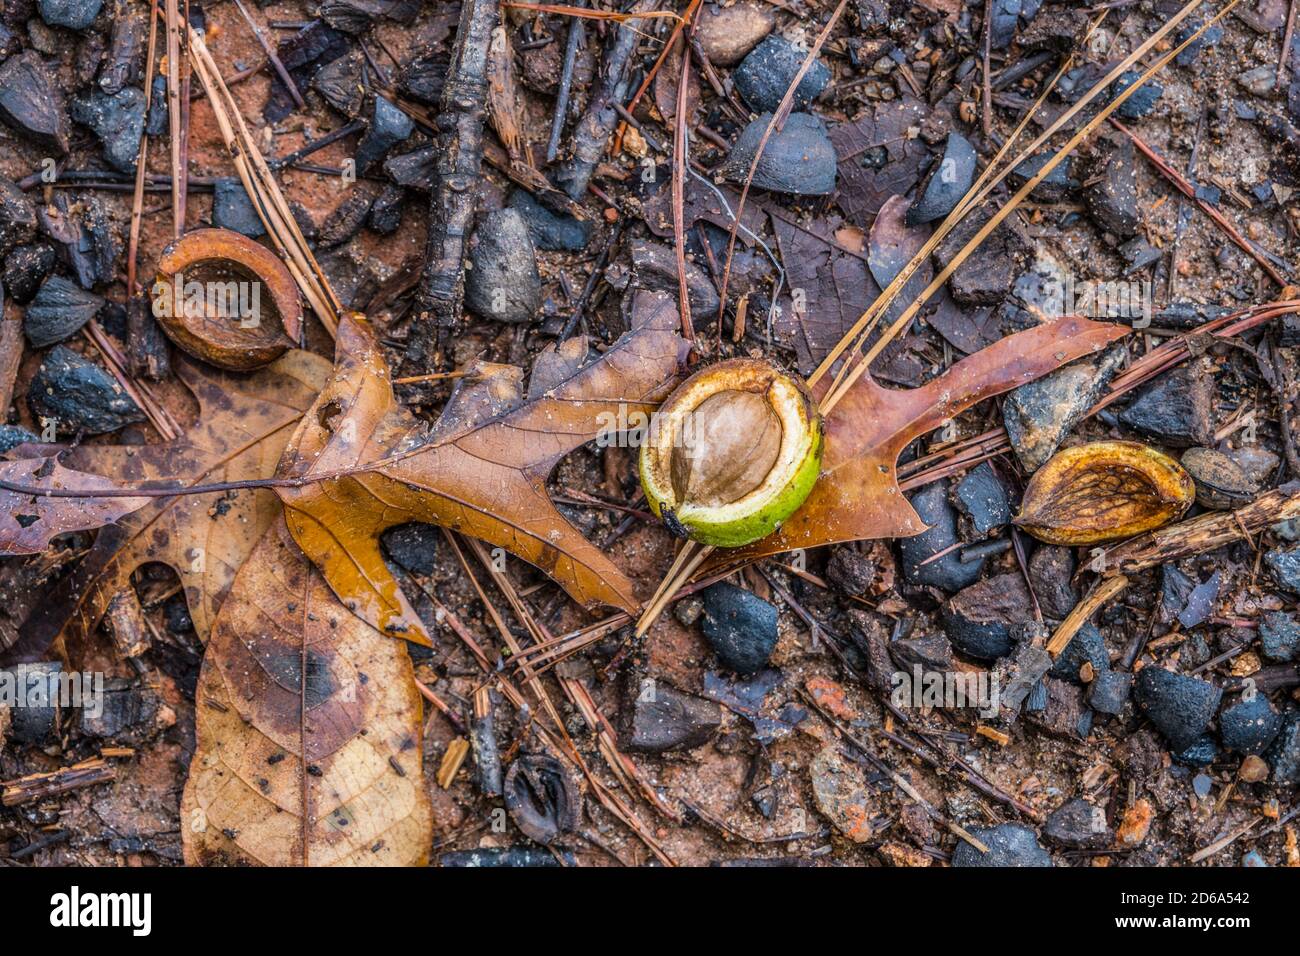 A large nut with the shell still on laying on the forest floor with fallen leaves twigs and other decaying debris in autumn Stock Photo